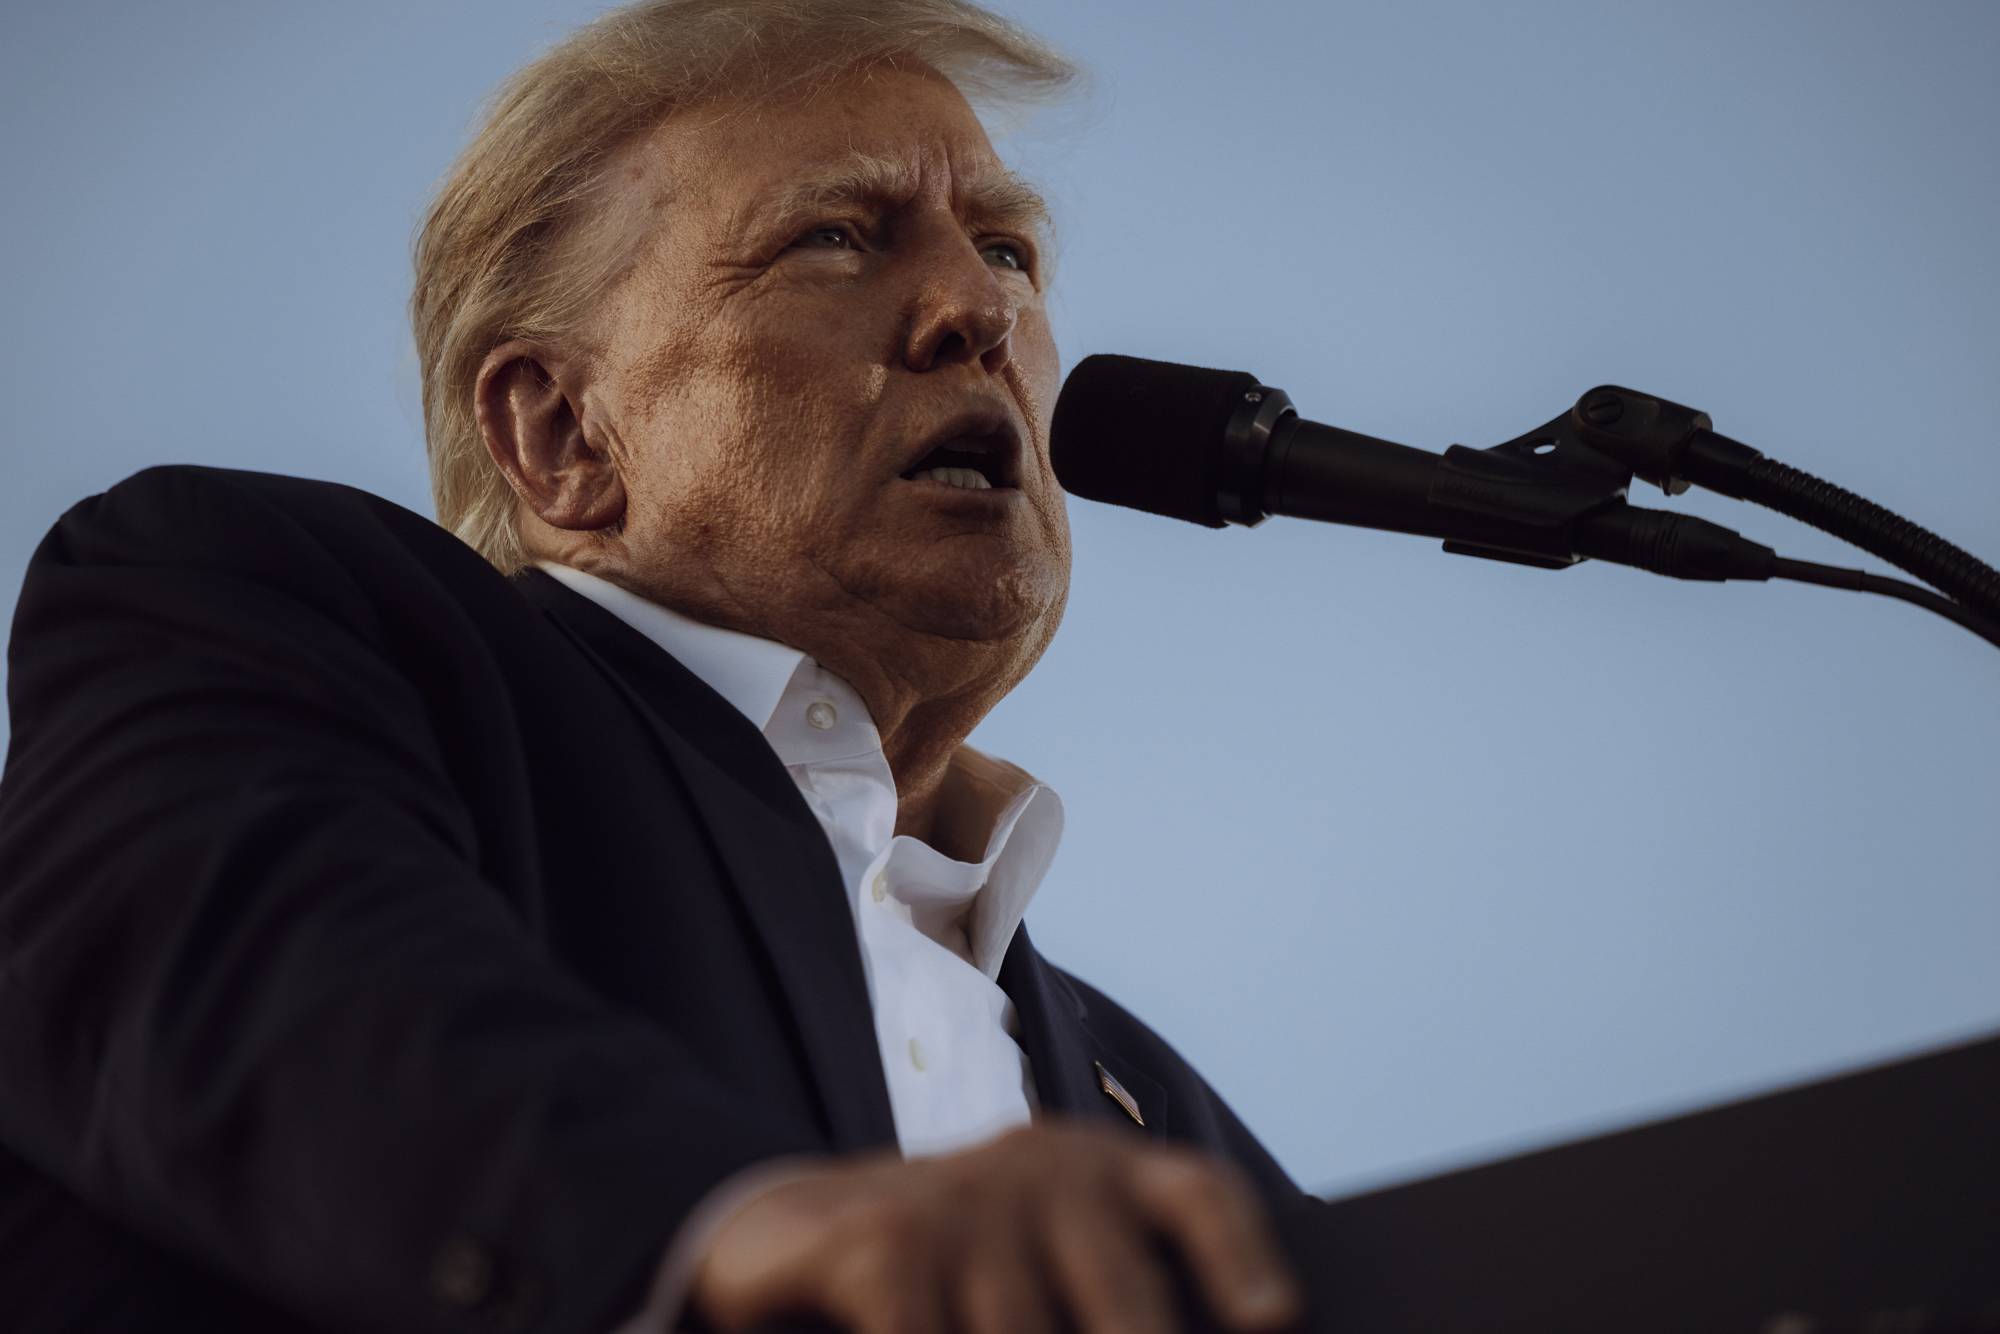 Former U.S. President Donald Trump speaks during a rally in Waco, Texas, on Saturday. | CHRISTOPHER LEE / THE NEW YORK TIMES